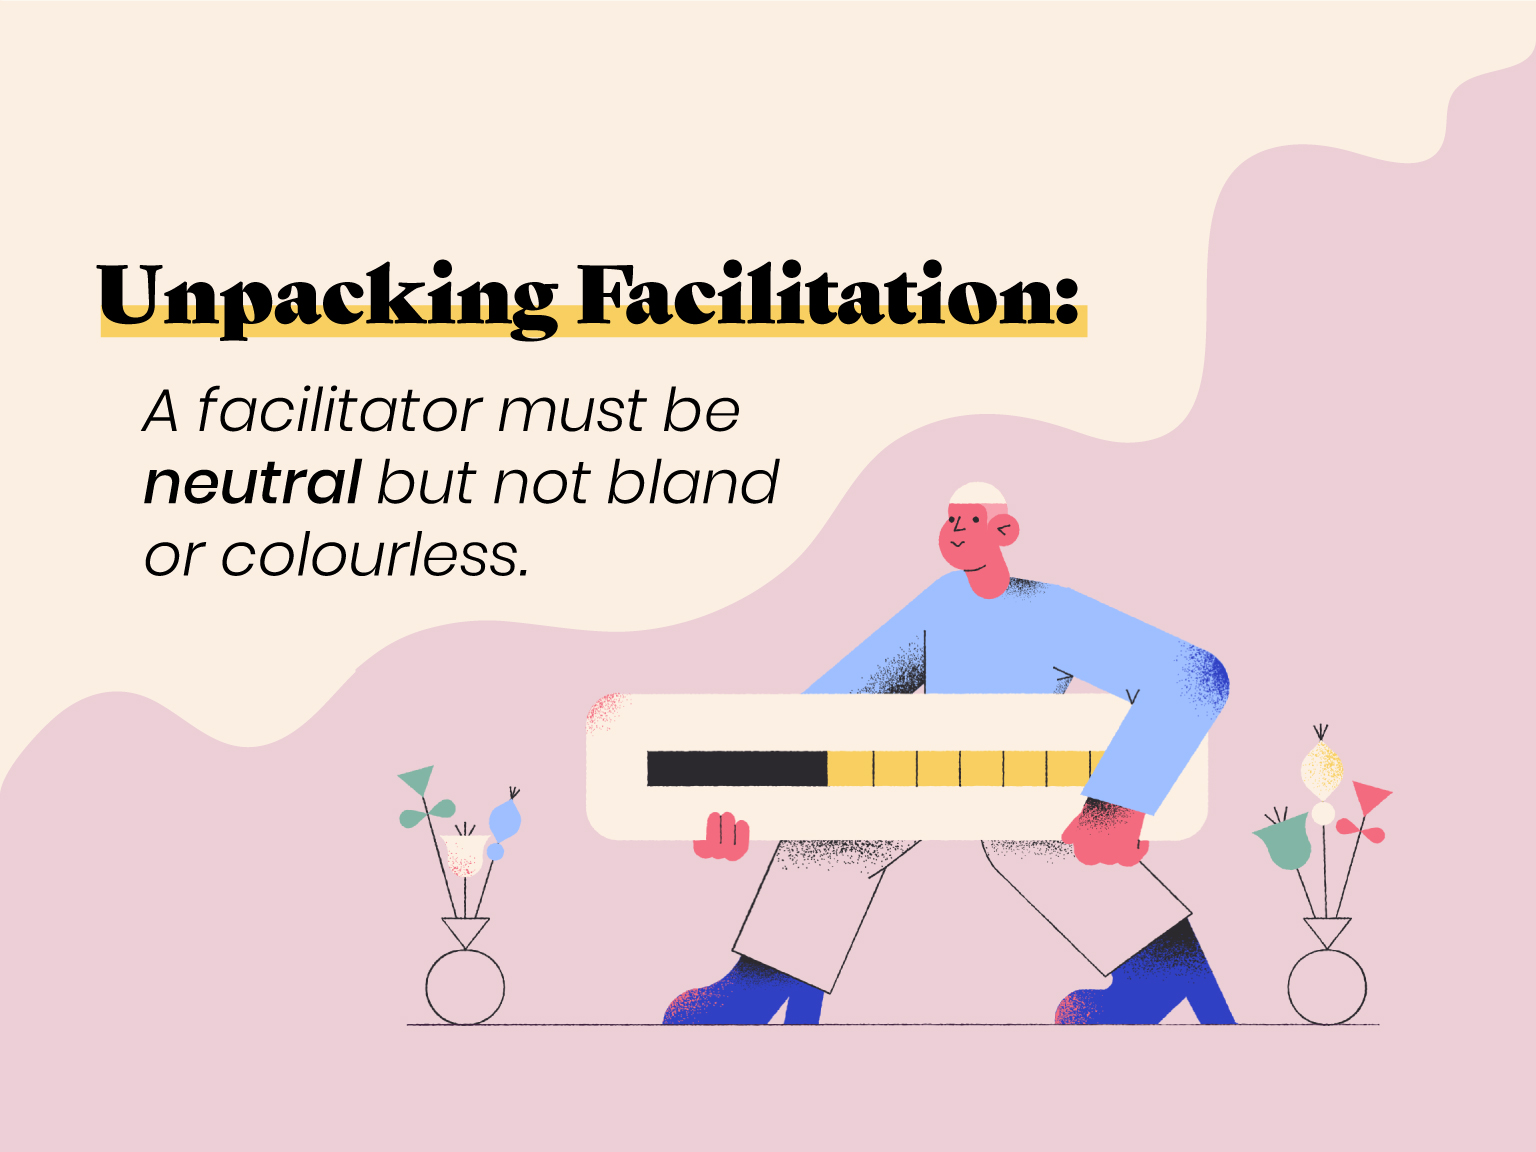 A facilitator must be neutral but not bland or colourless